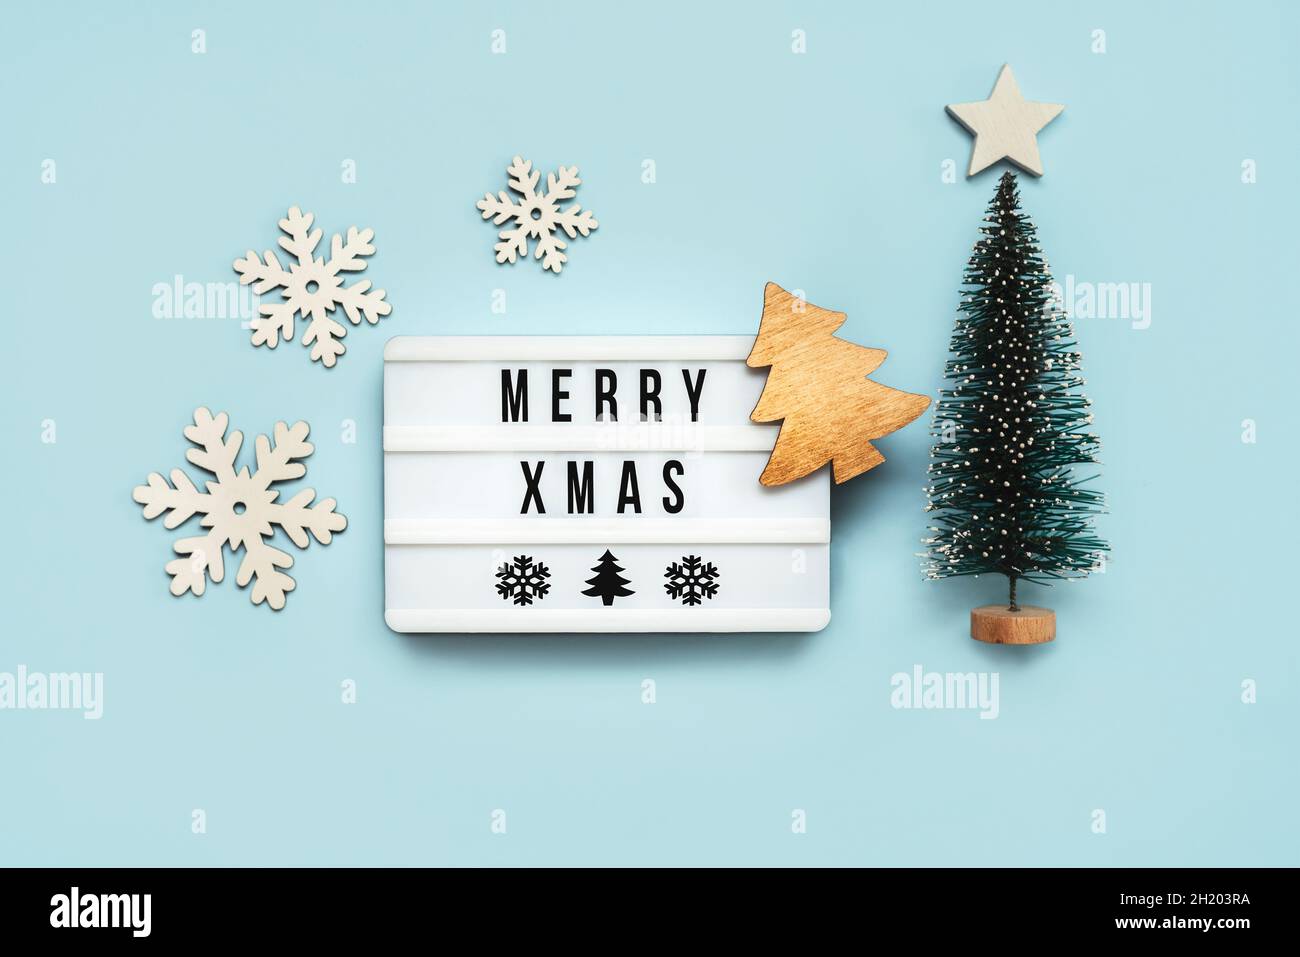 Merry Christmas.Light box with the text Merry Xmas and Christmas decoration over blue background.Christmas concept background Stock Photo